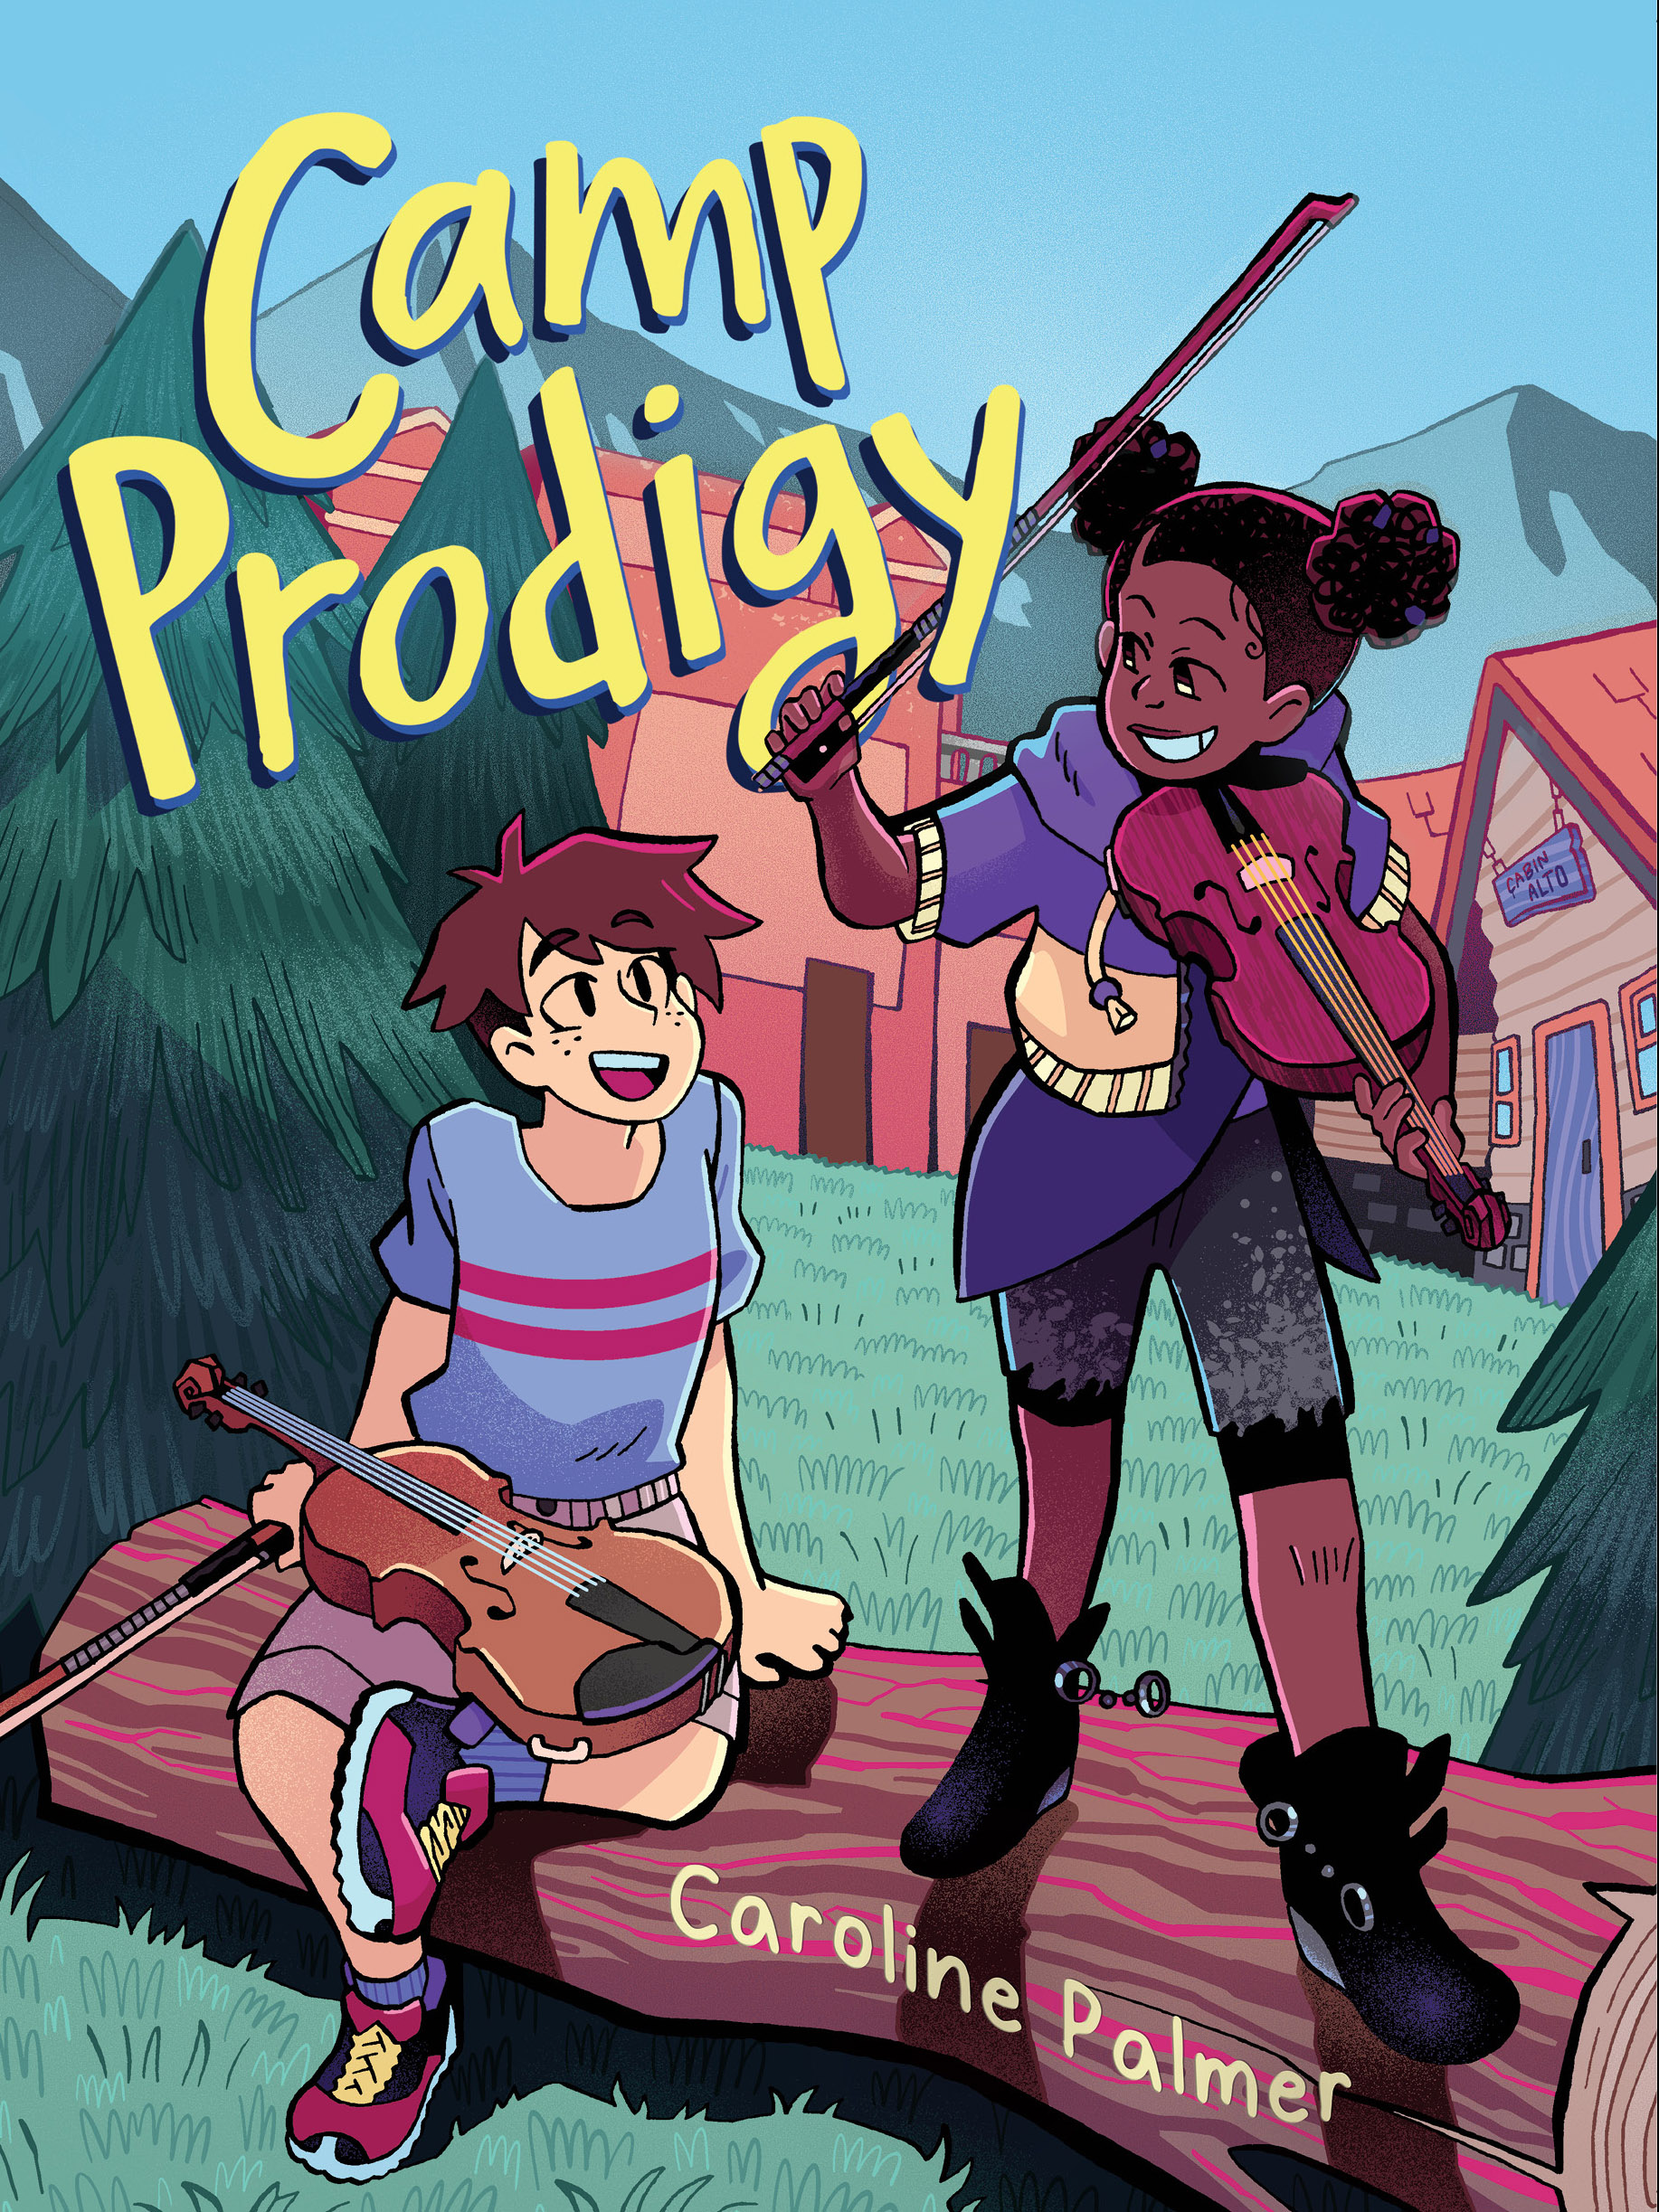 Author Chat with Caroline Palmer (Camp Prodigy), Plus Giveaway! ~ US ONLY (No P.O. boxes)!